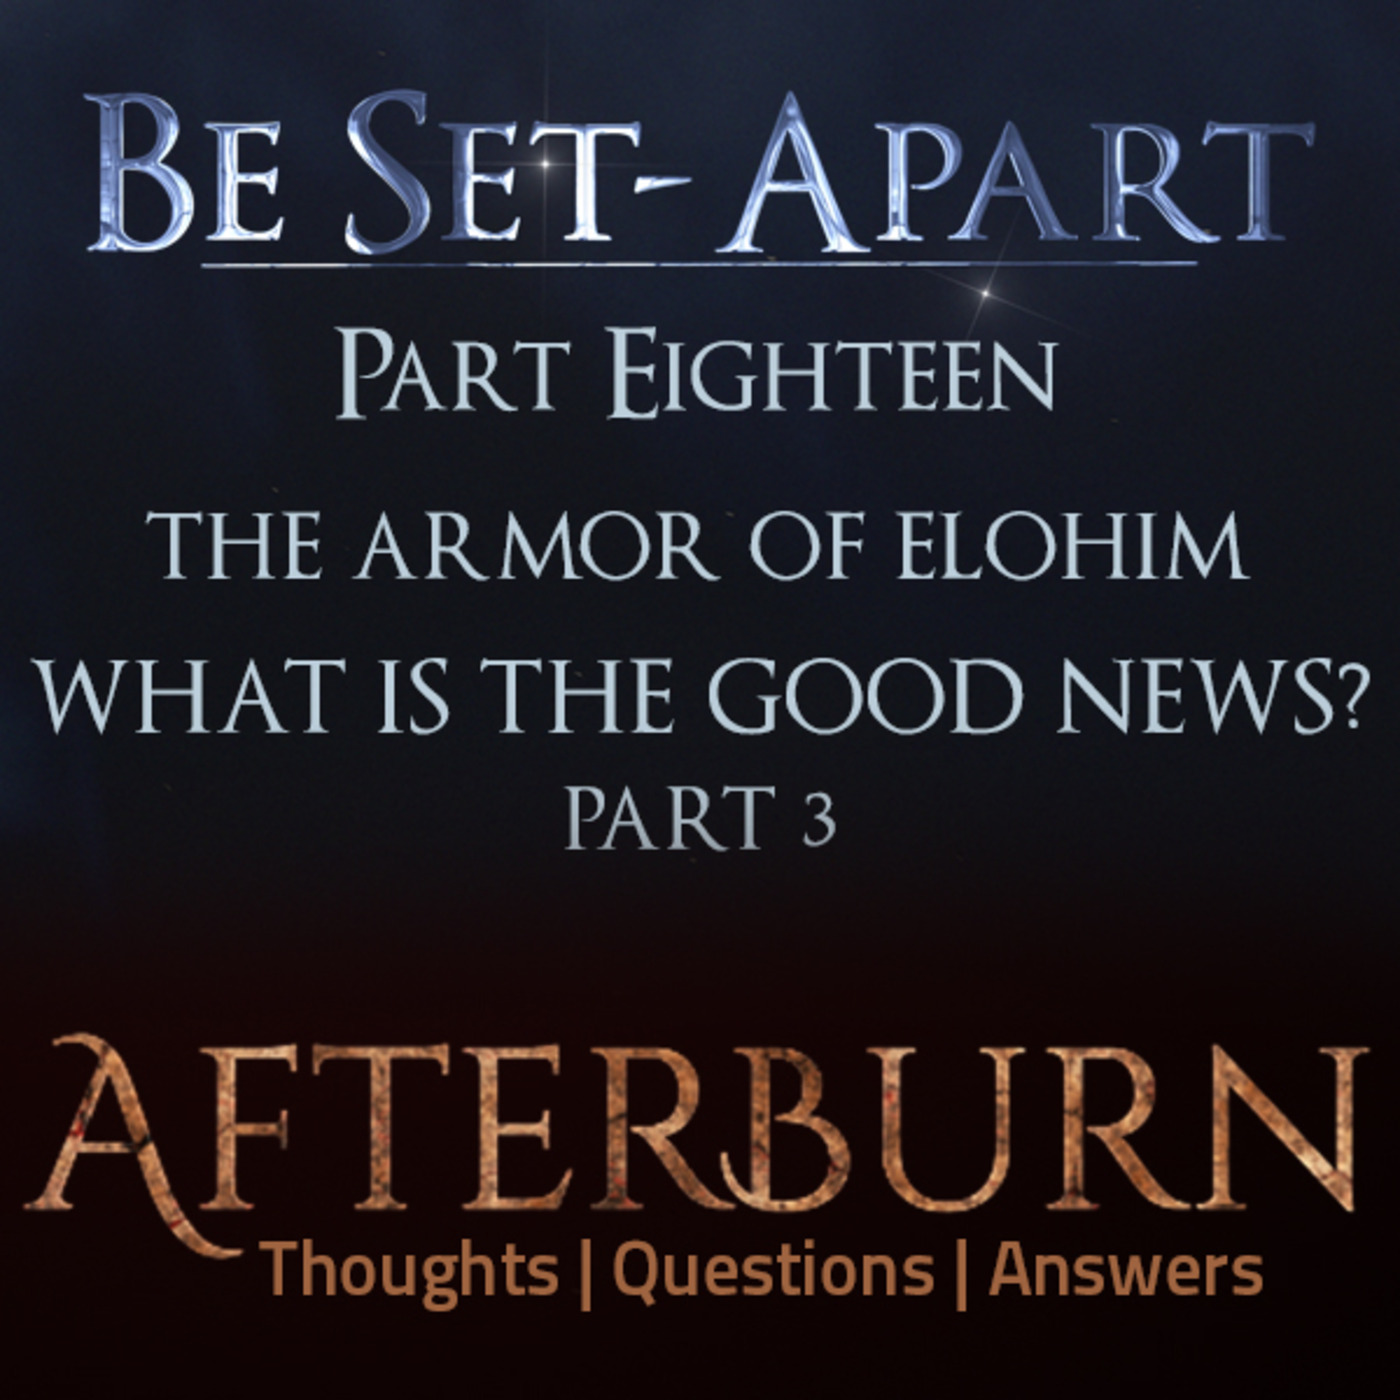 Episode 803: Afterburn | Be Set-Apart | Part Eighteen | The Armor of Elohim | What is the Good News? Part 3